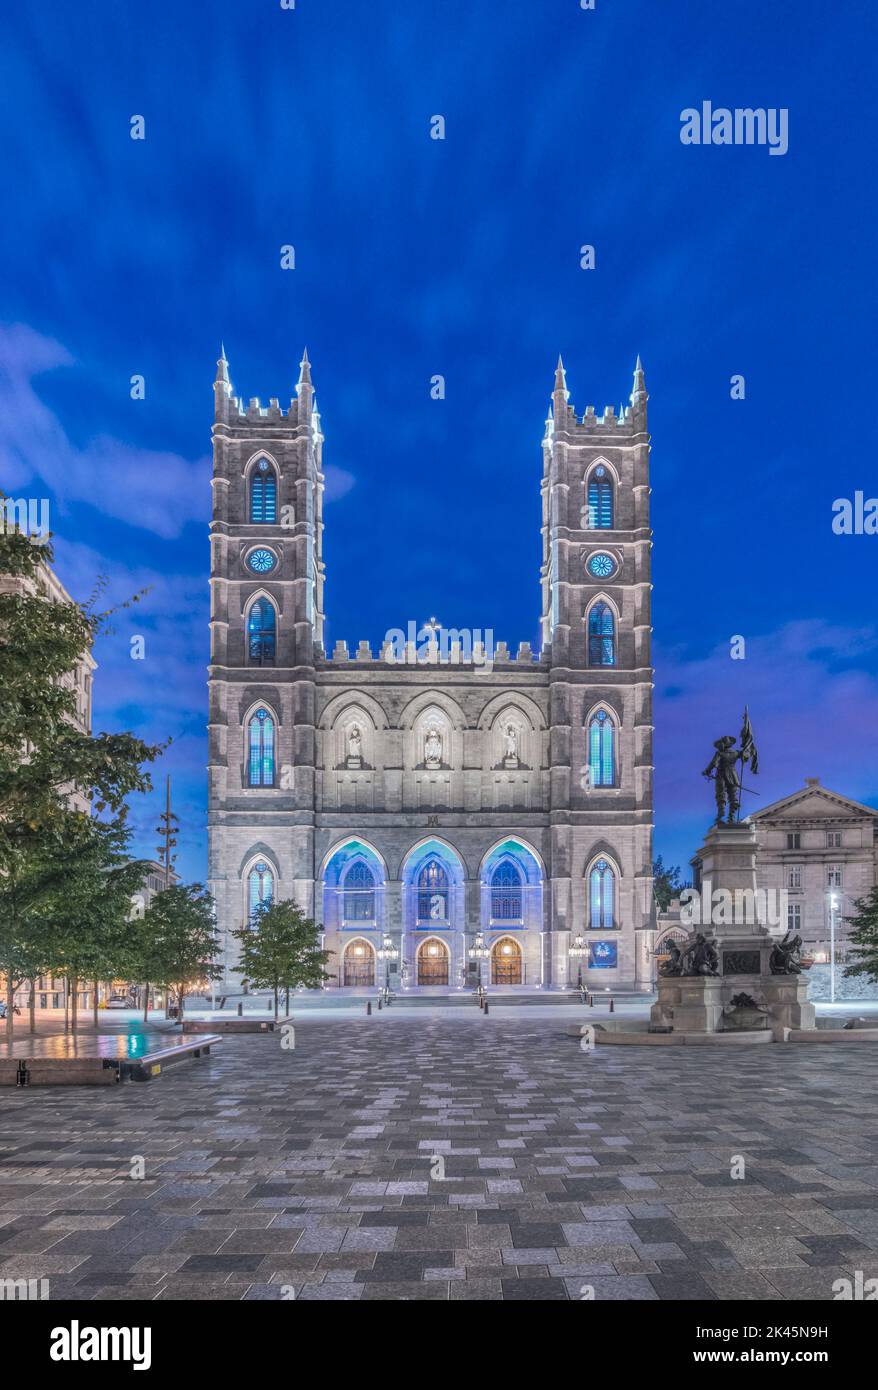 The Notre Dame Basilica, lit up at dusk in the city square in the Old Town of Montreal. Stock Photo